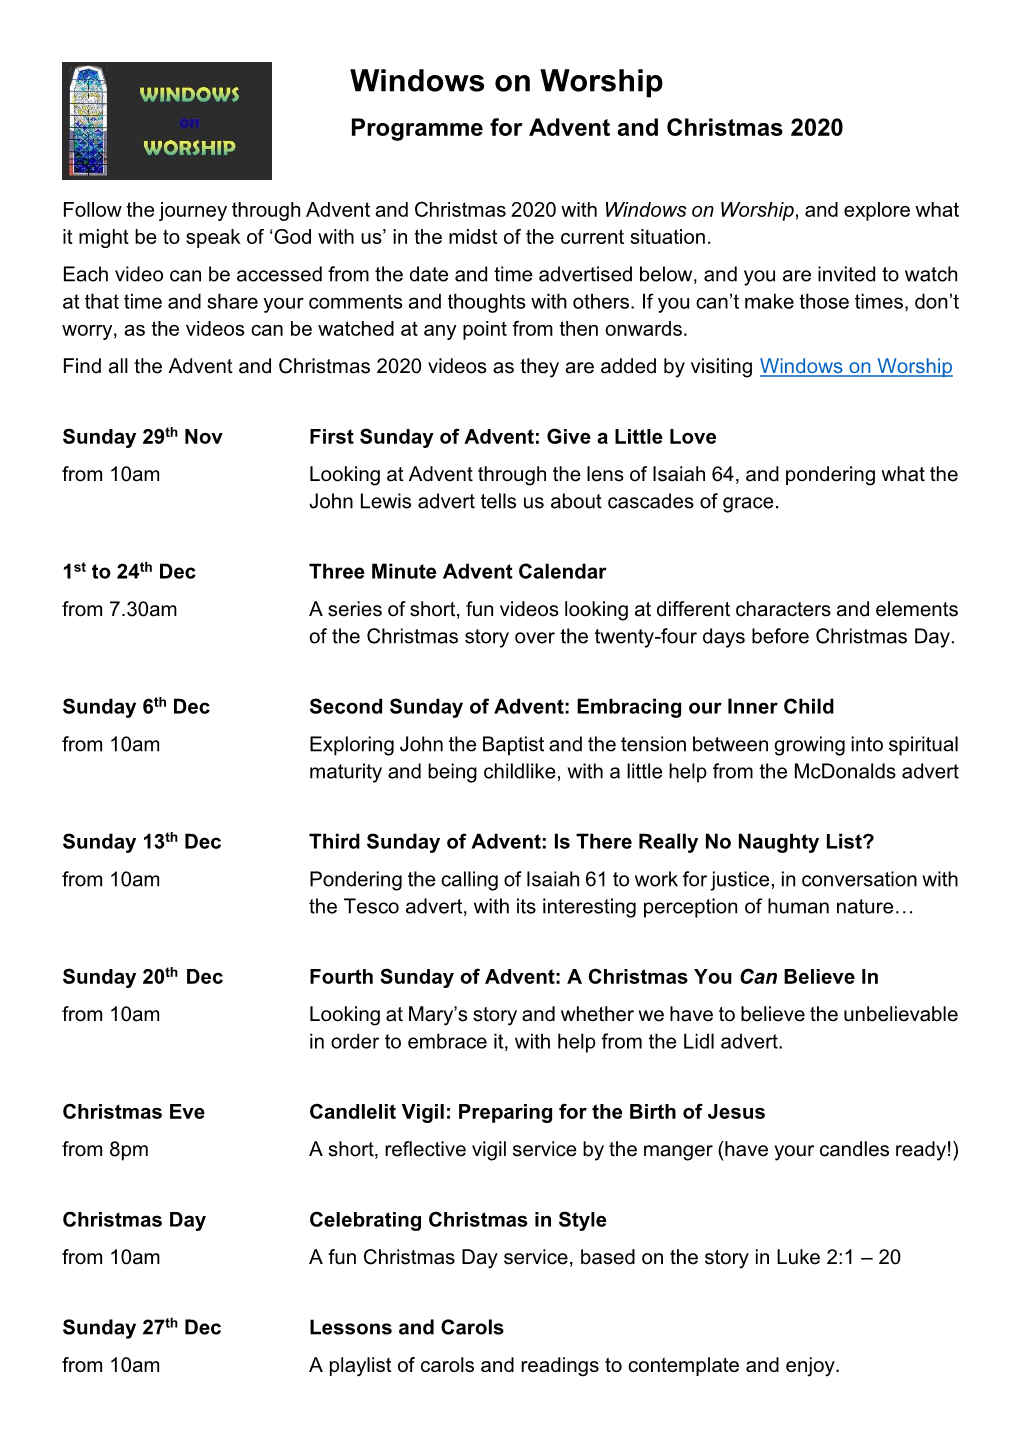 Windows on Worship Programme for Advent and Christmas 2020